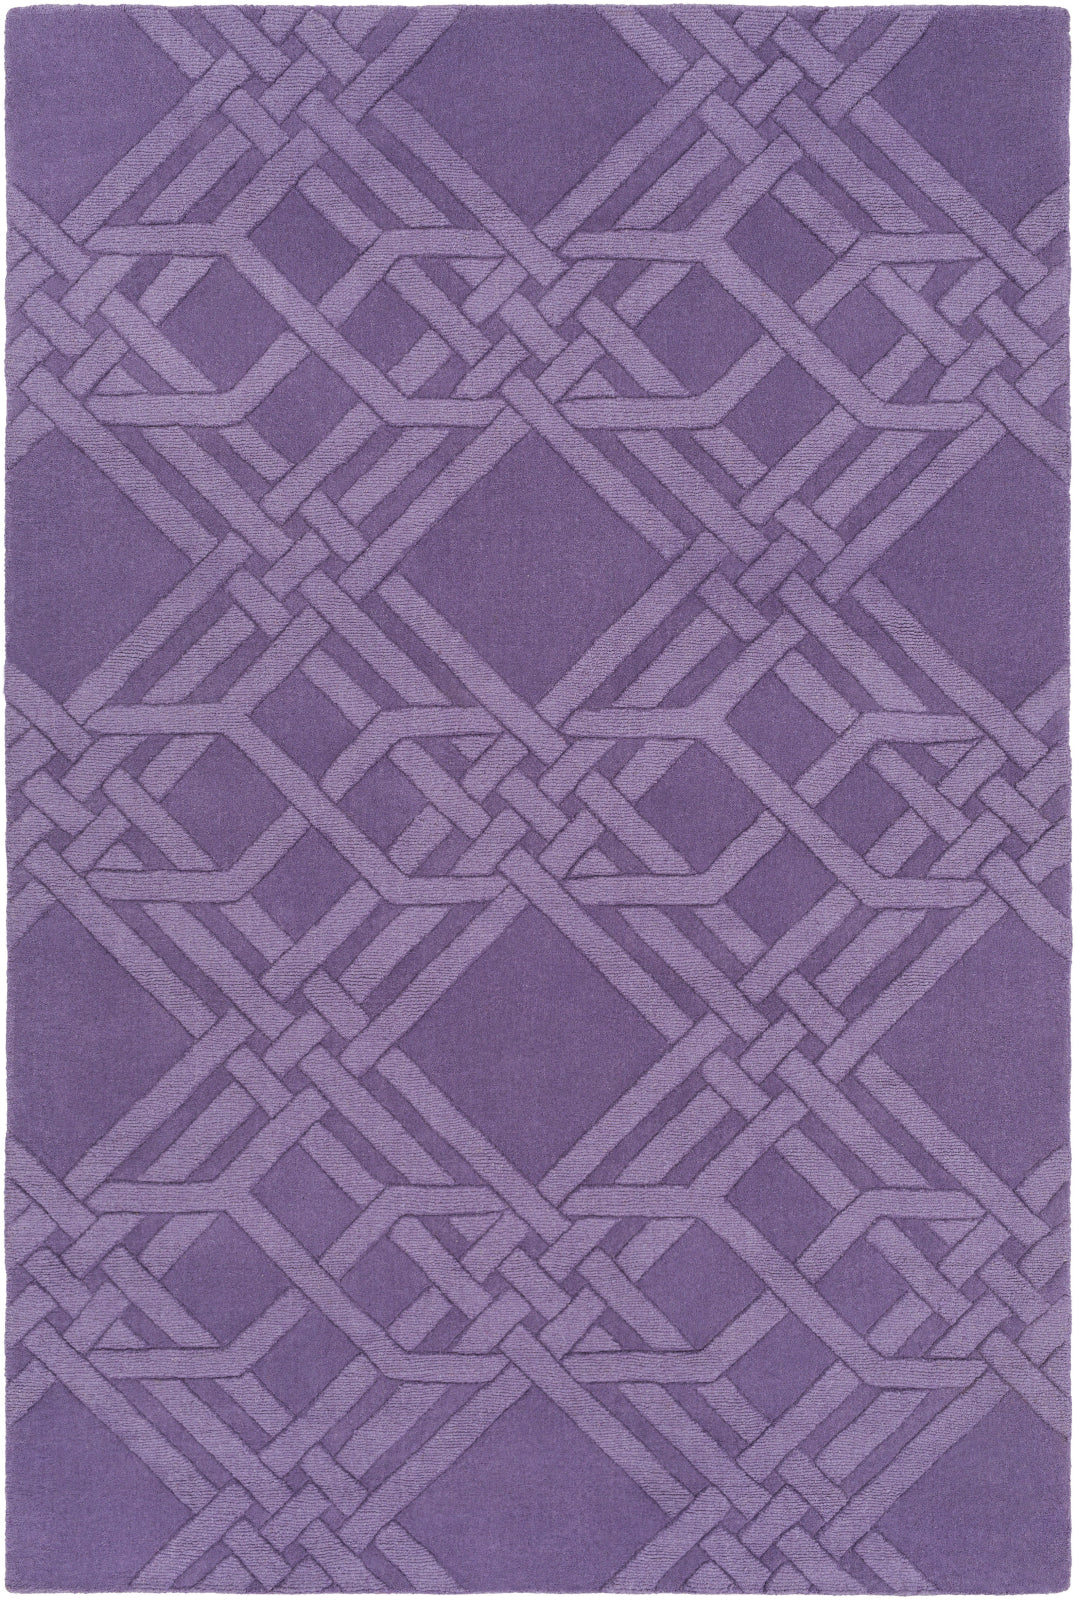 Surya The Oakes OAK-6004 Area Rug by Florence Broadhurst